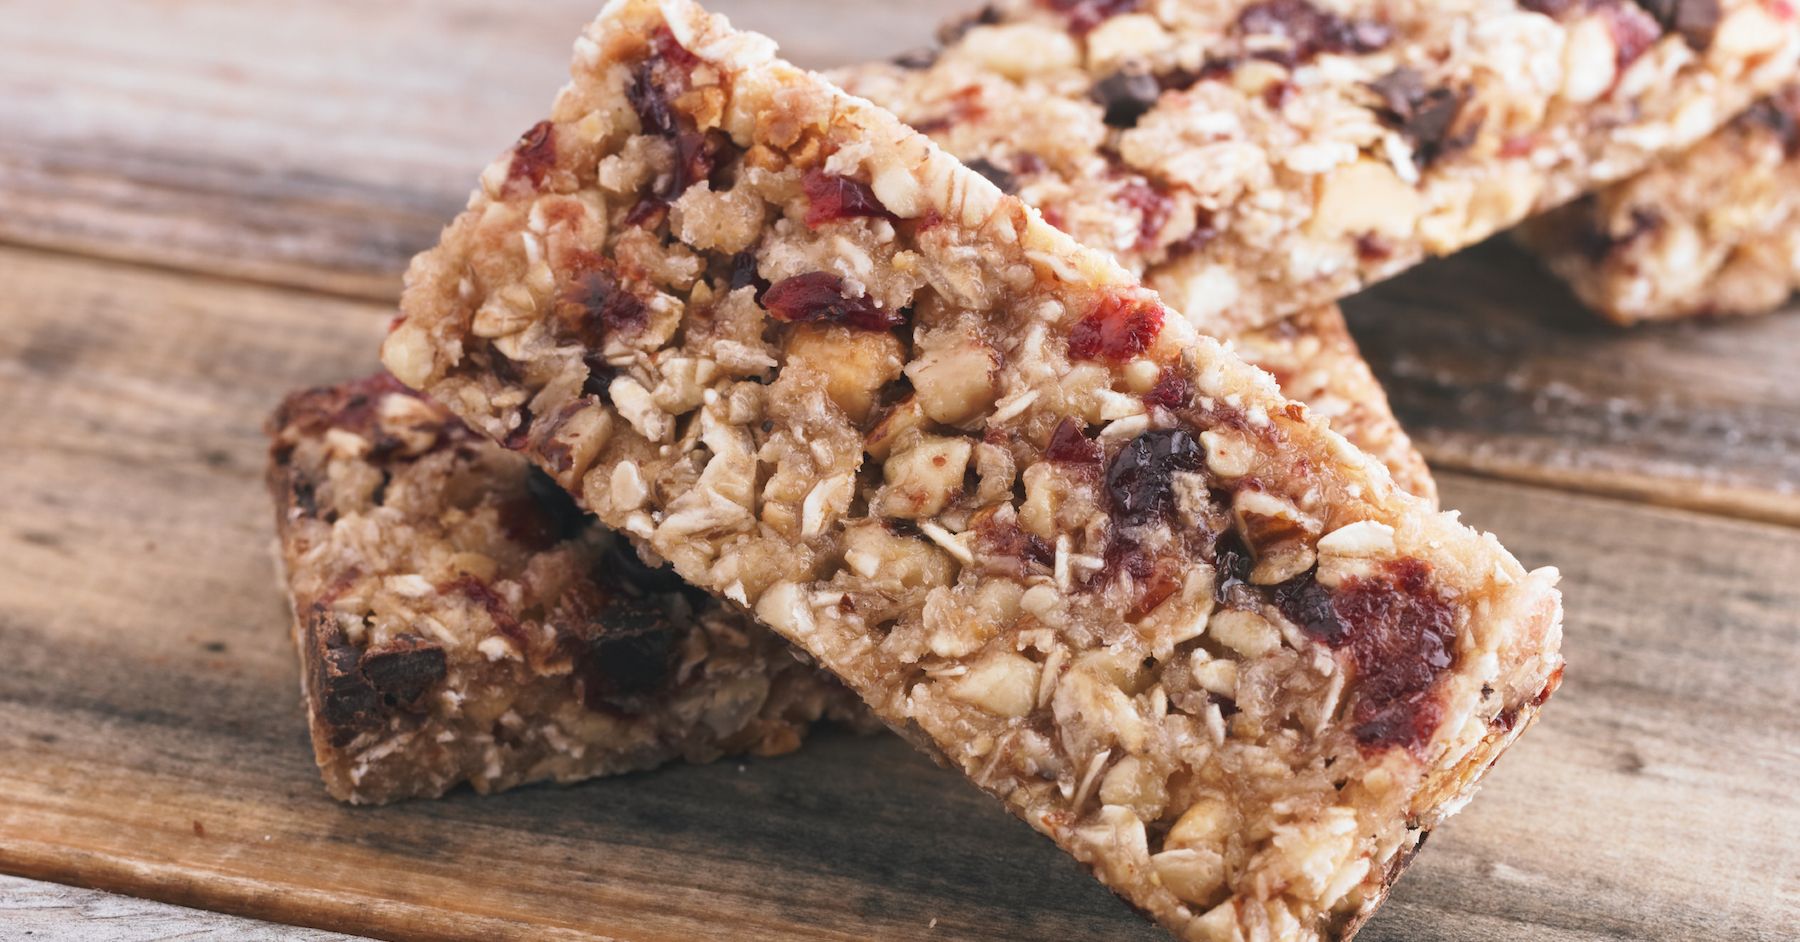 Weight Reduction- This Sugar Free Almond And Cranberry Granola Bar Is Perfect For ‘Healthy Diet’